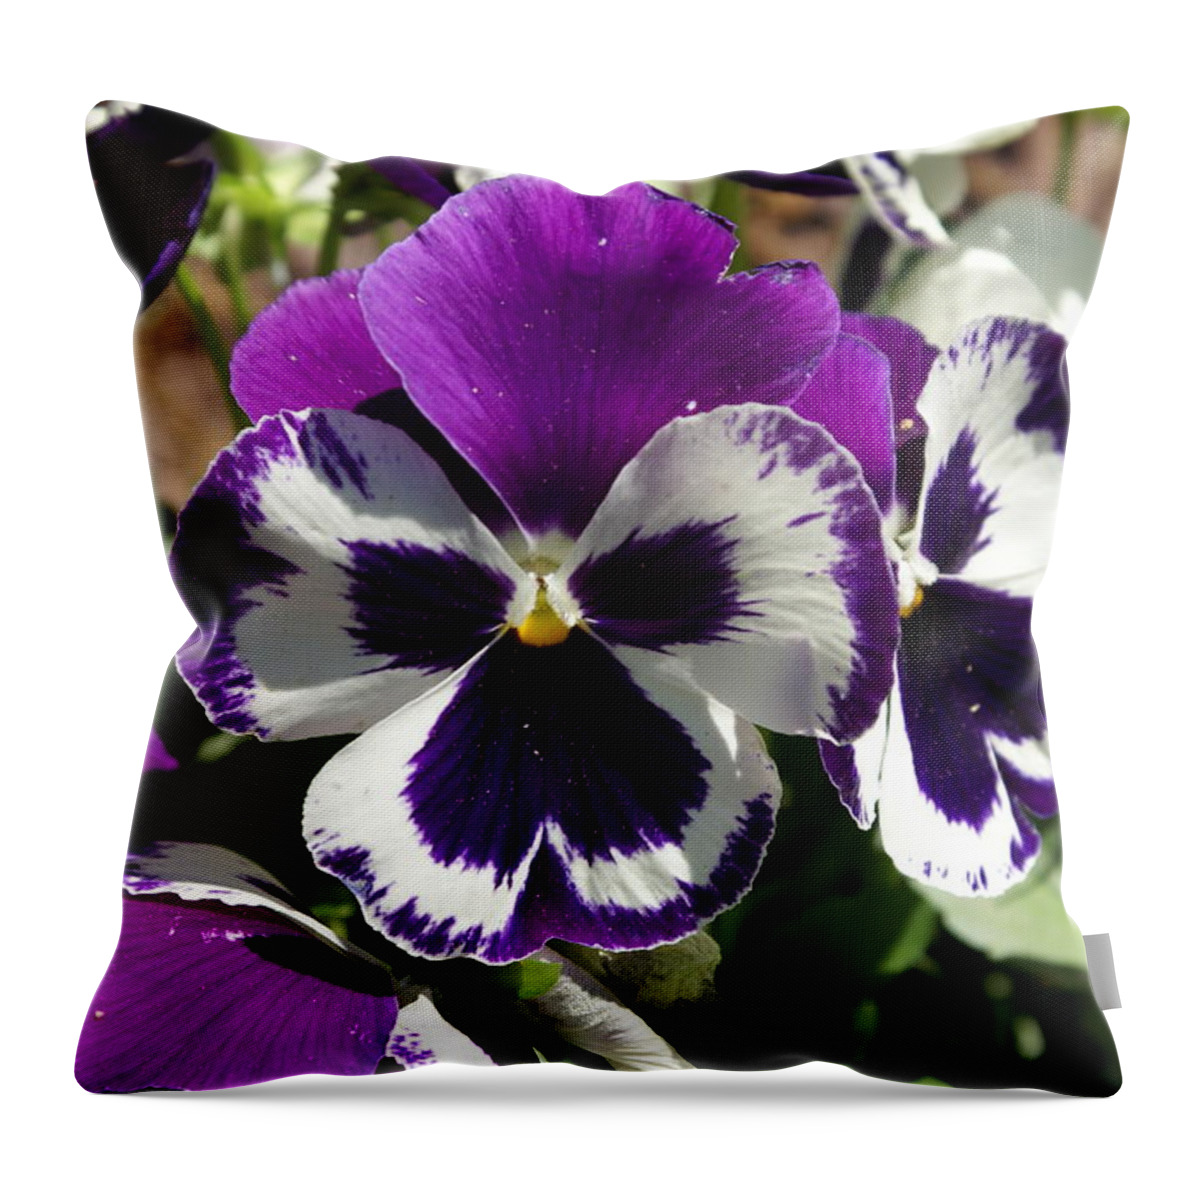  Throw Pillow featuring the photograph Purple Pansy by Heather E Harman